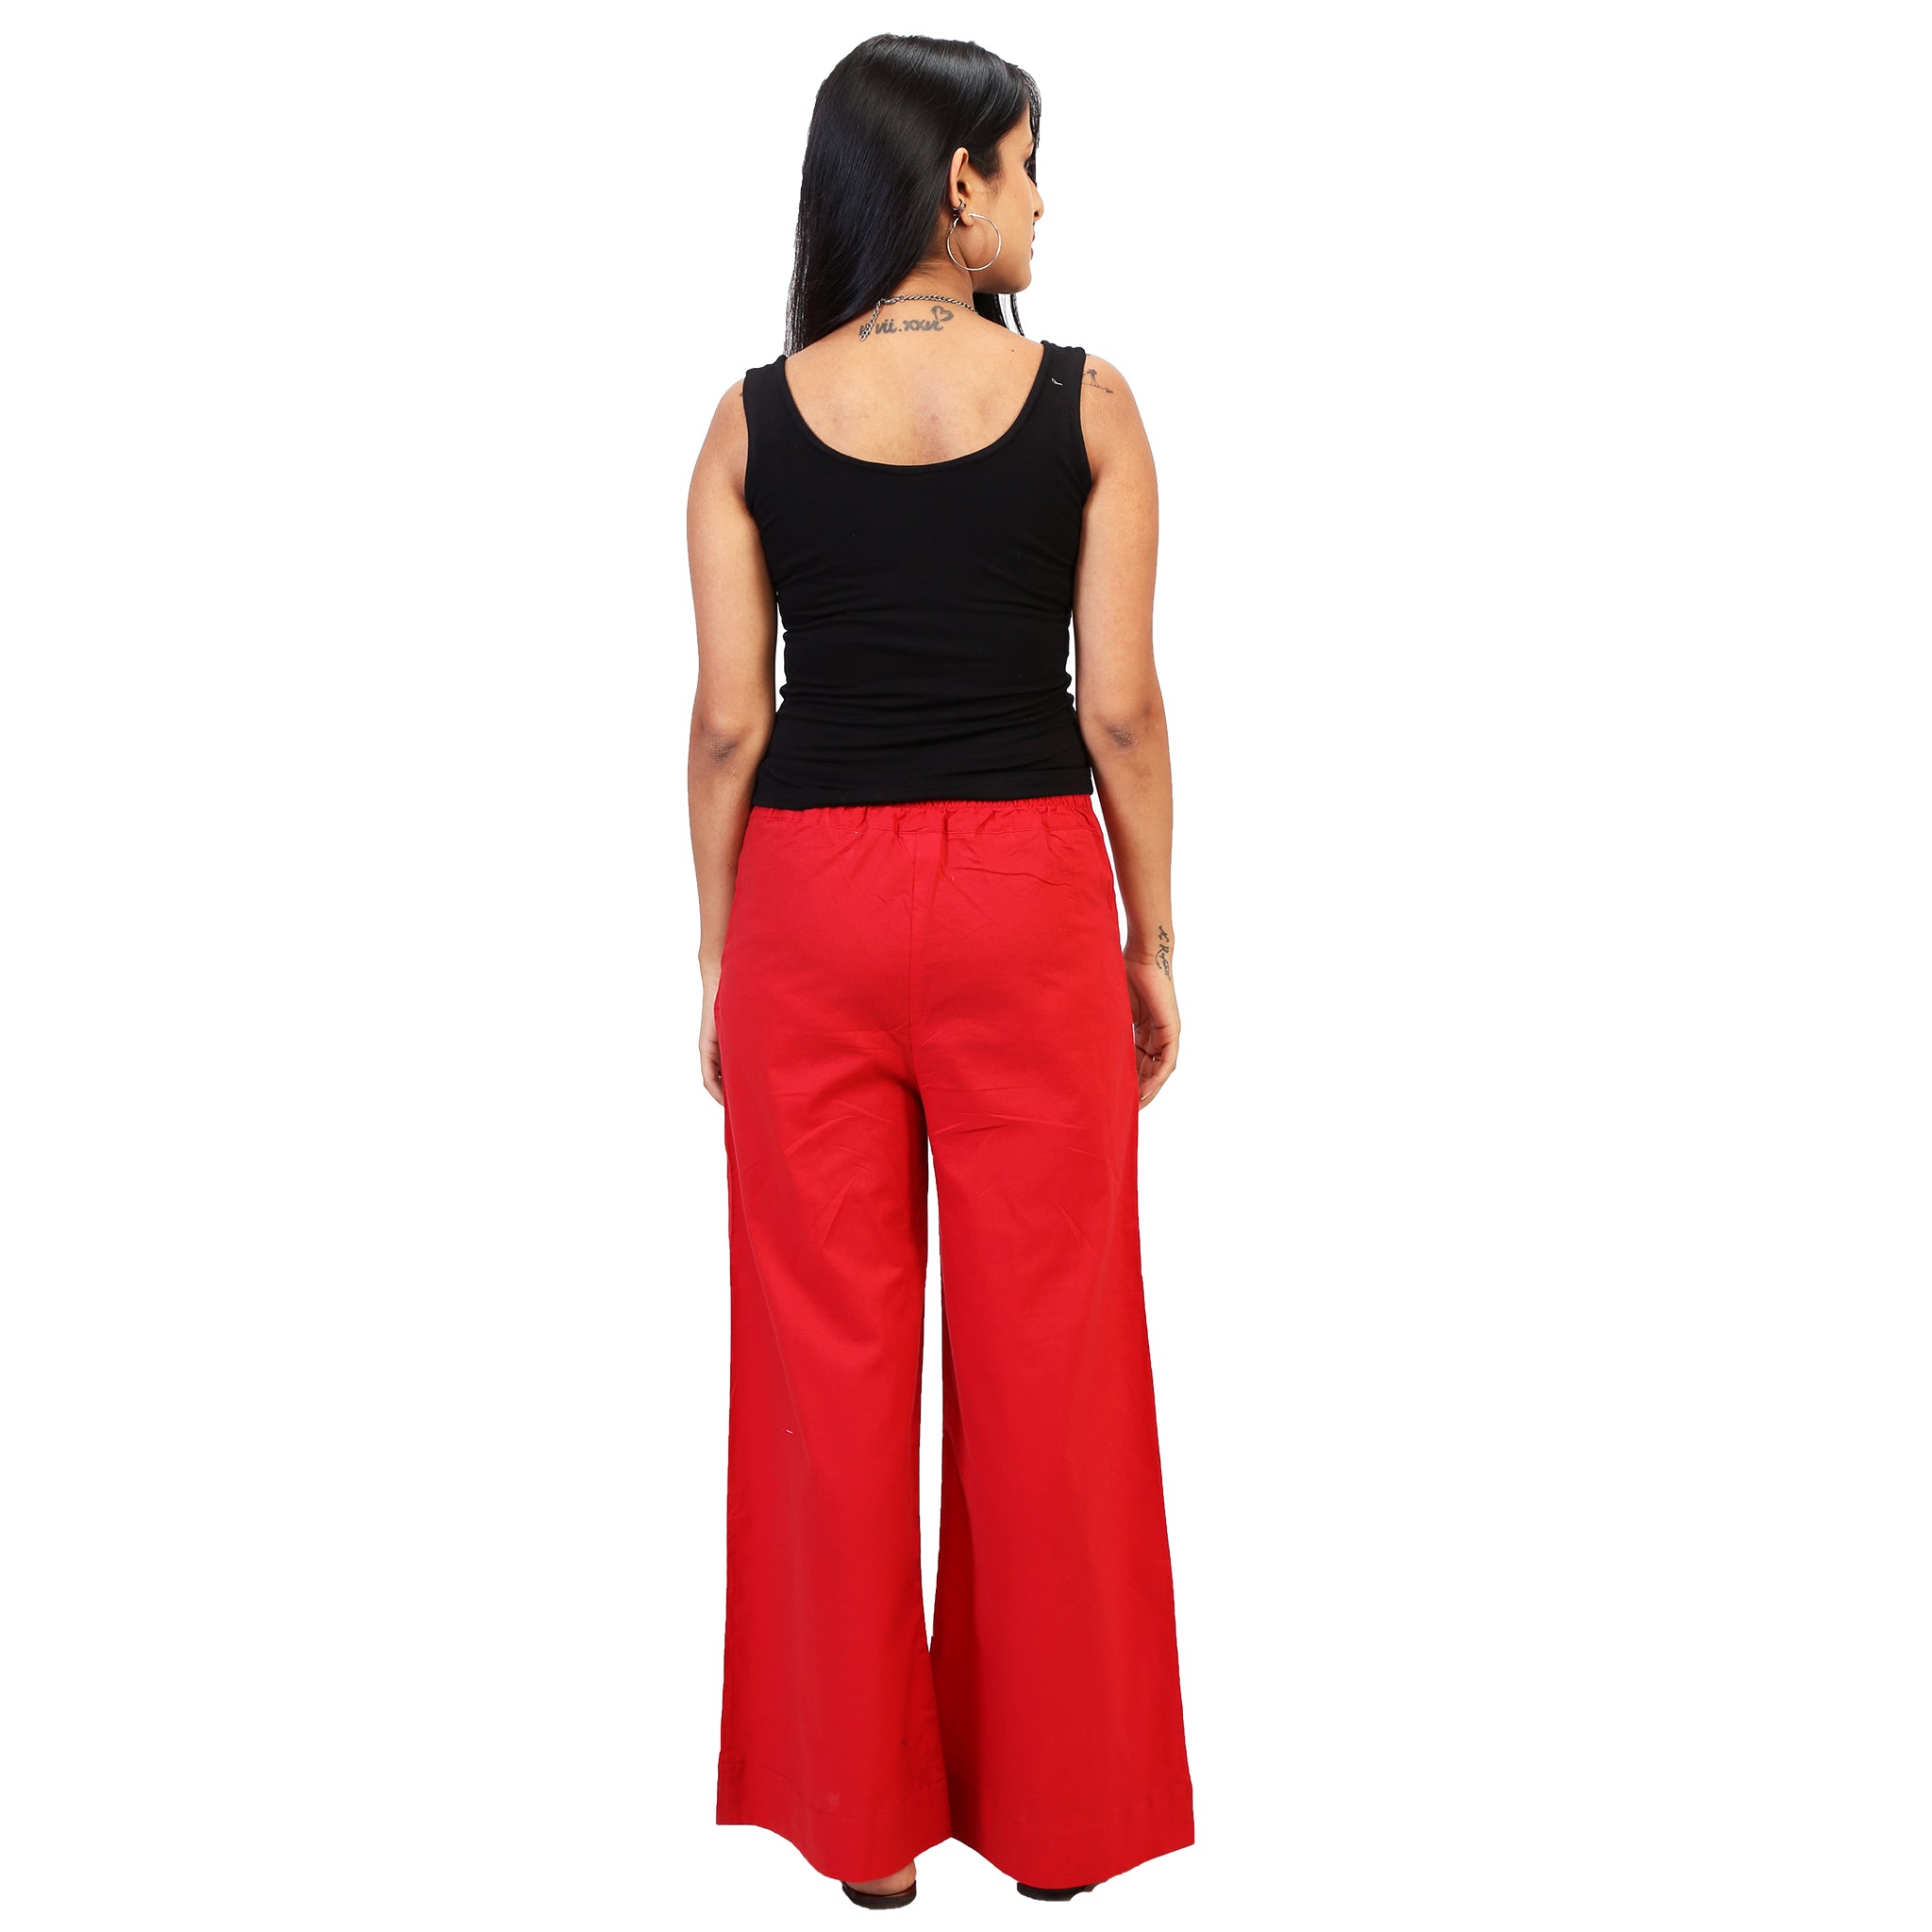 Buy Pink Plain Palazzo Pant Rayon Palazzo Pant for Best Price, Reviews,  Free Shipping